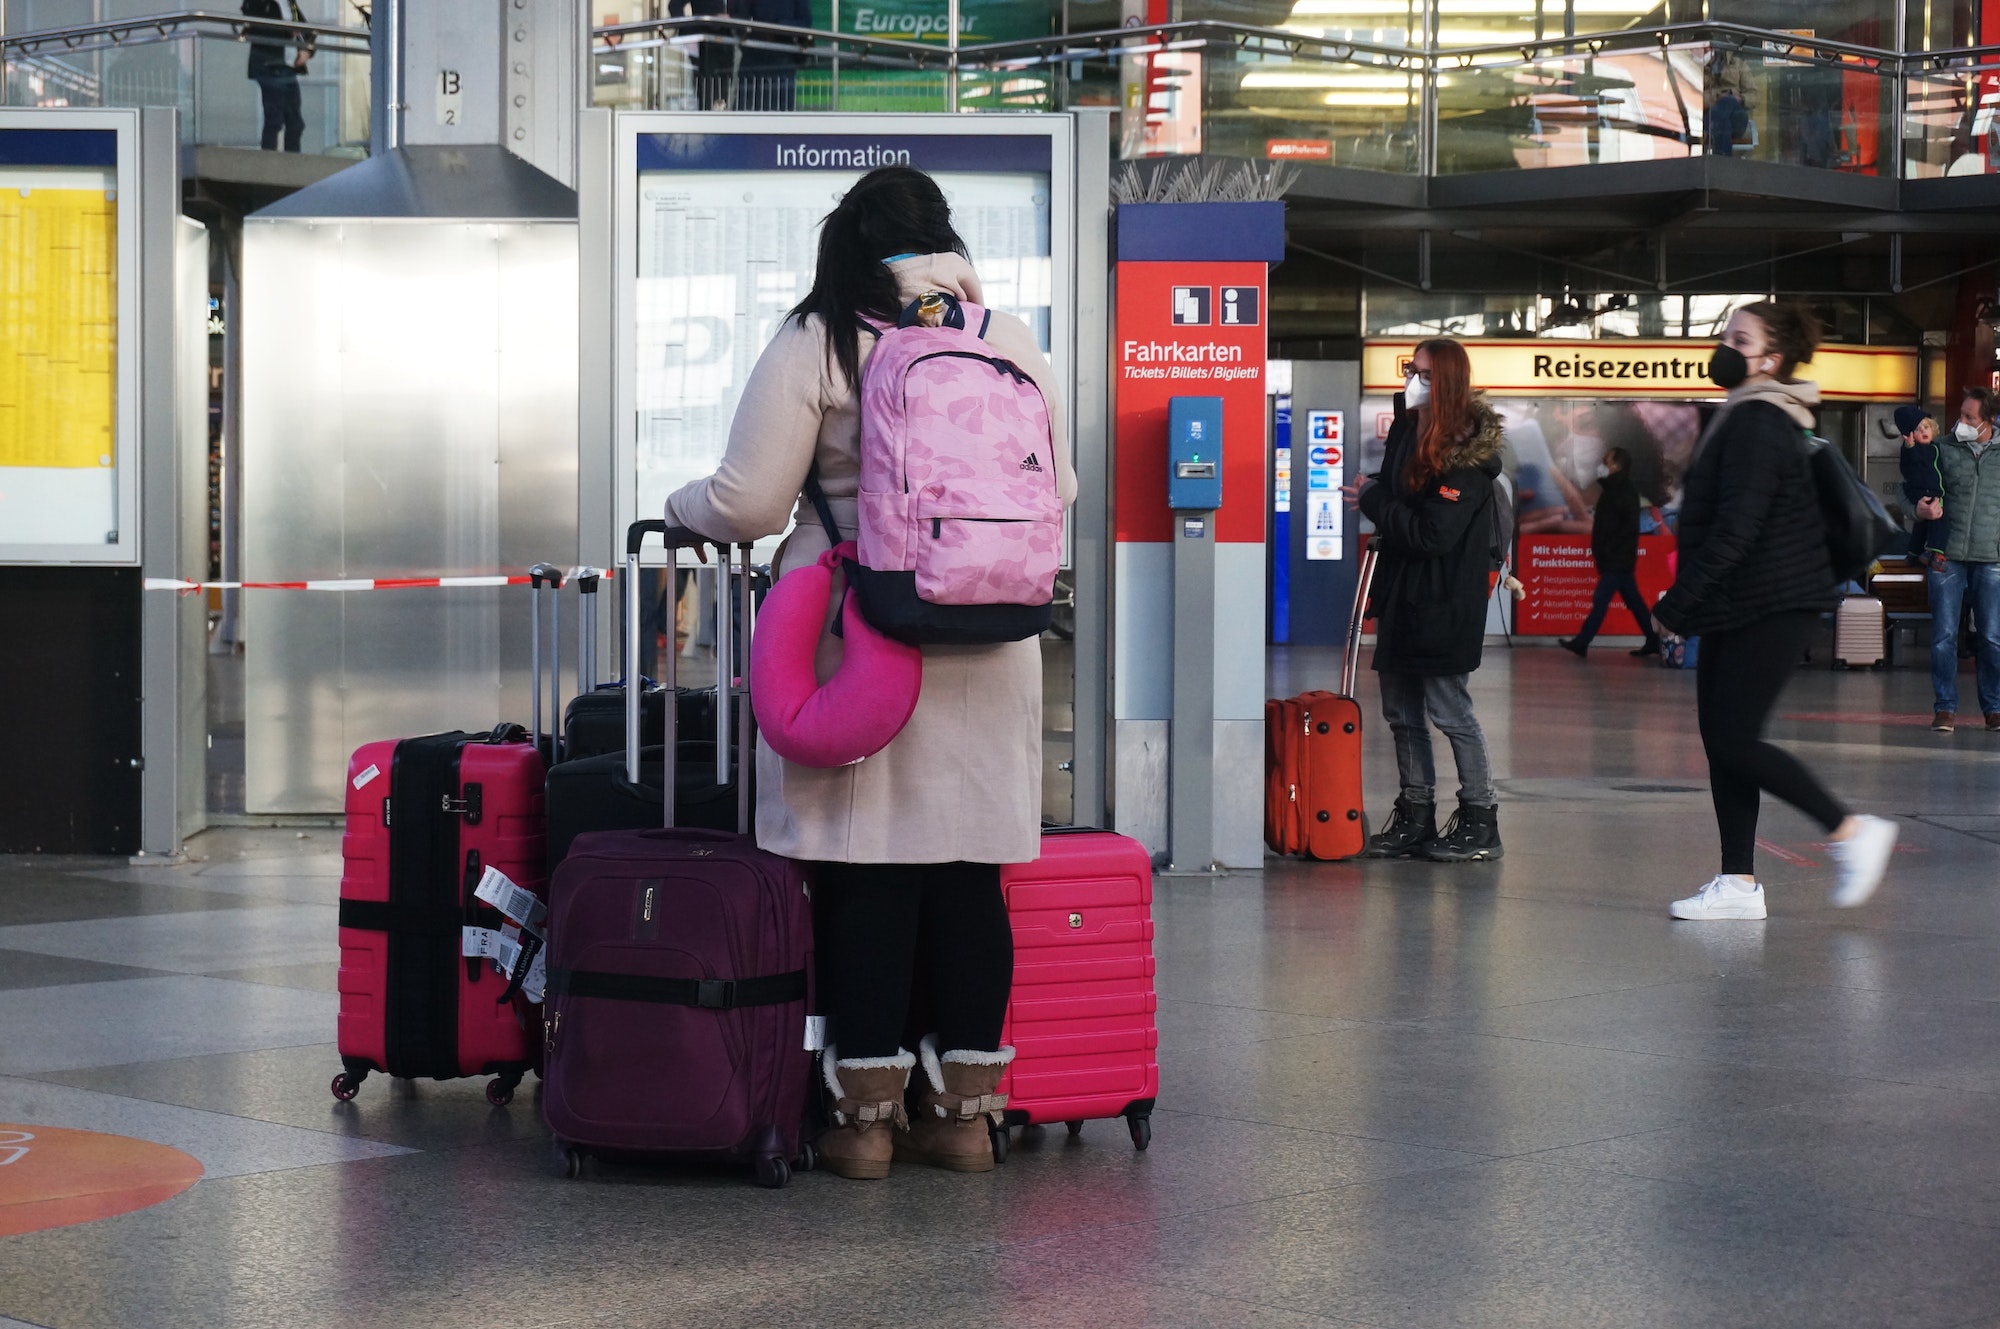 Woman traveling, waiting at Düsseldorf Central station, carrying a lot of pink luggage.